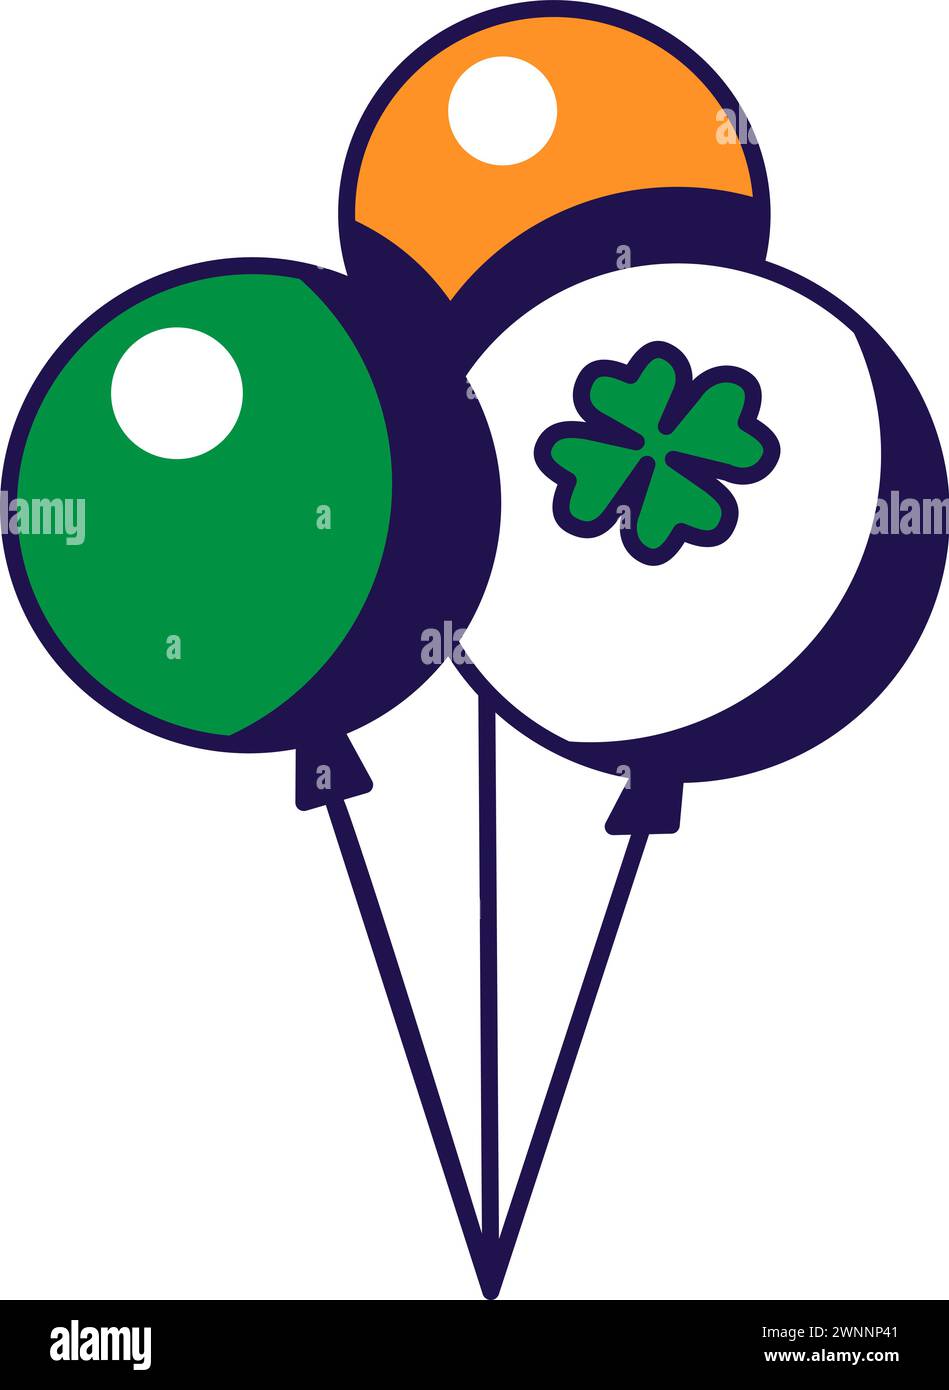 Set of colorful balloons. Traditional festive element, attributes of St. Patrick Day. Festival fair exhibition decoration element. Cartoon vector icon Stock Vector